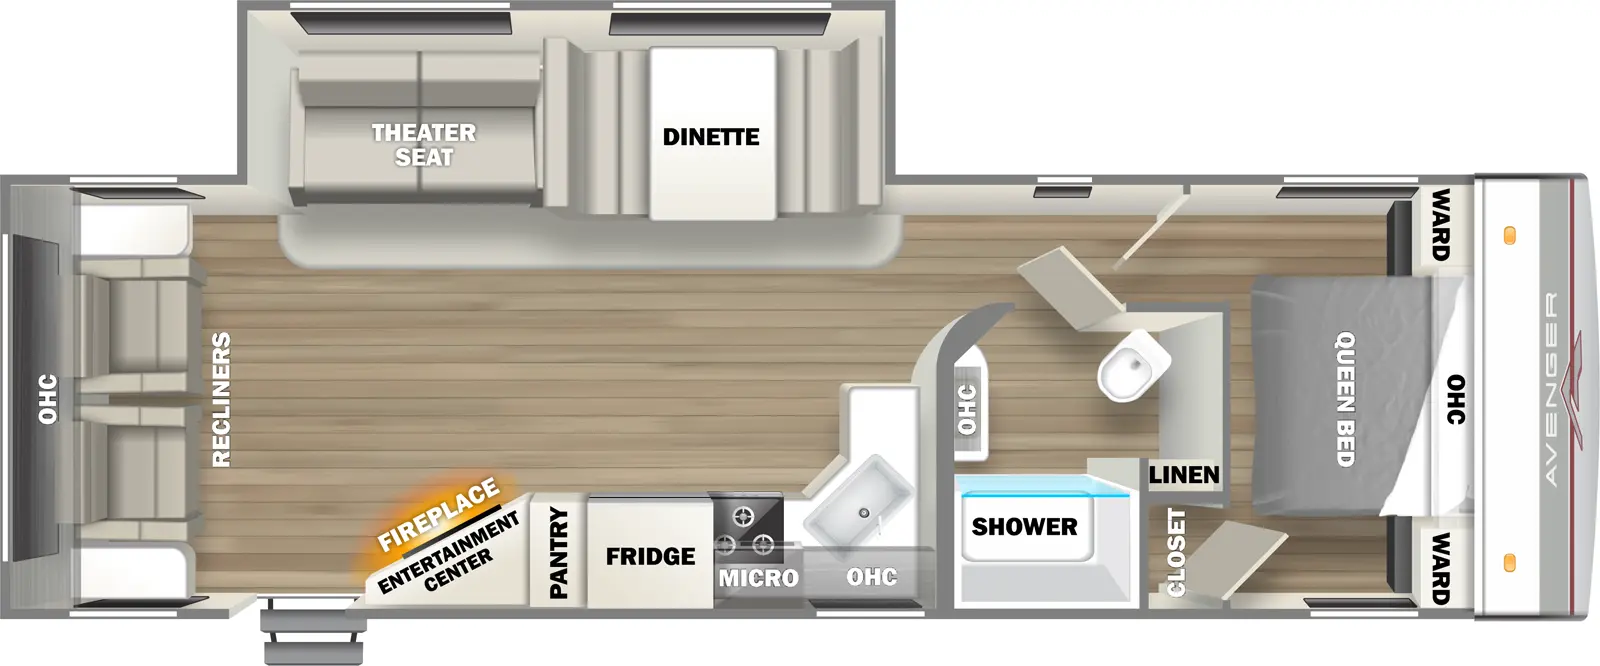 The 29RSL has one entry and one slideout. Interior layout front to back: foot-facing queen bed with overhead cabinet, wardrobes on each side, and door side closet; door side full bathroom with linen closet and medicine cabinet; off-door side slideout with dinette and theater seat; kitchen counter wraps from inner wall to door side with sink, overhead cabinet, microwave, cooktop, refrigerator, pantry, angles entertainment center with fireplace below, and entry; rear recliners with overhead cabinet.